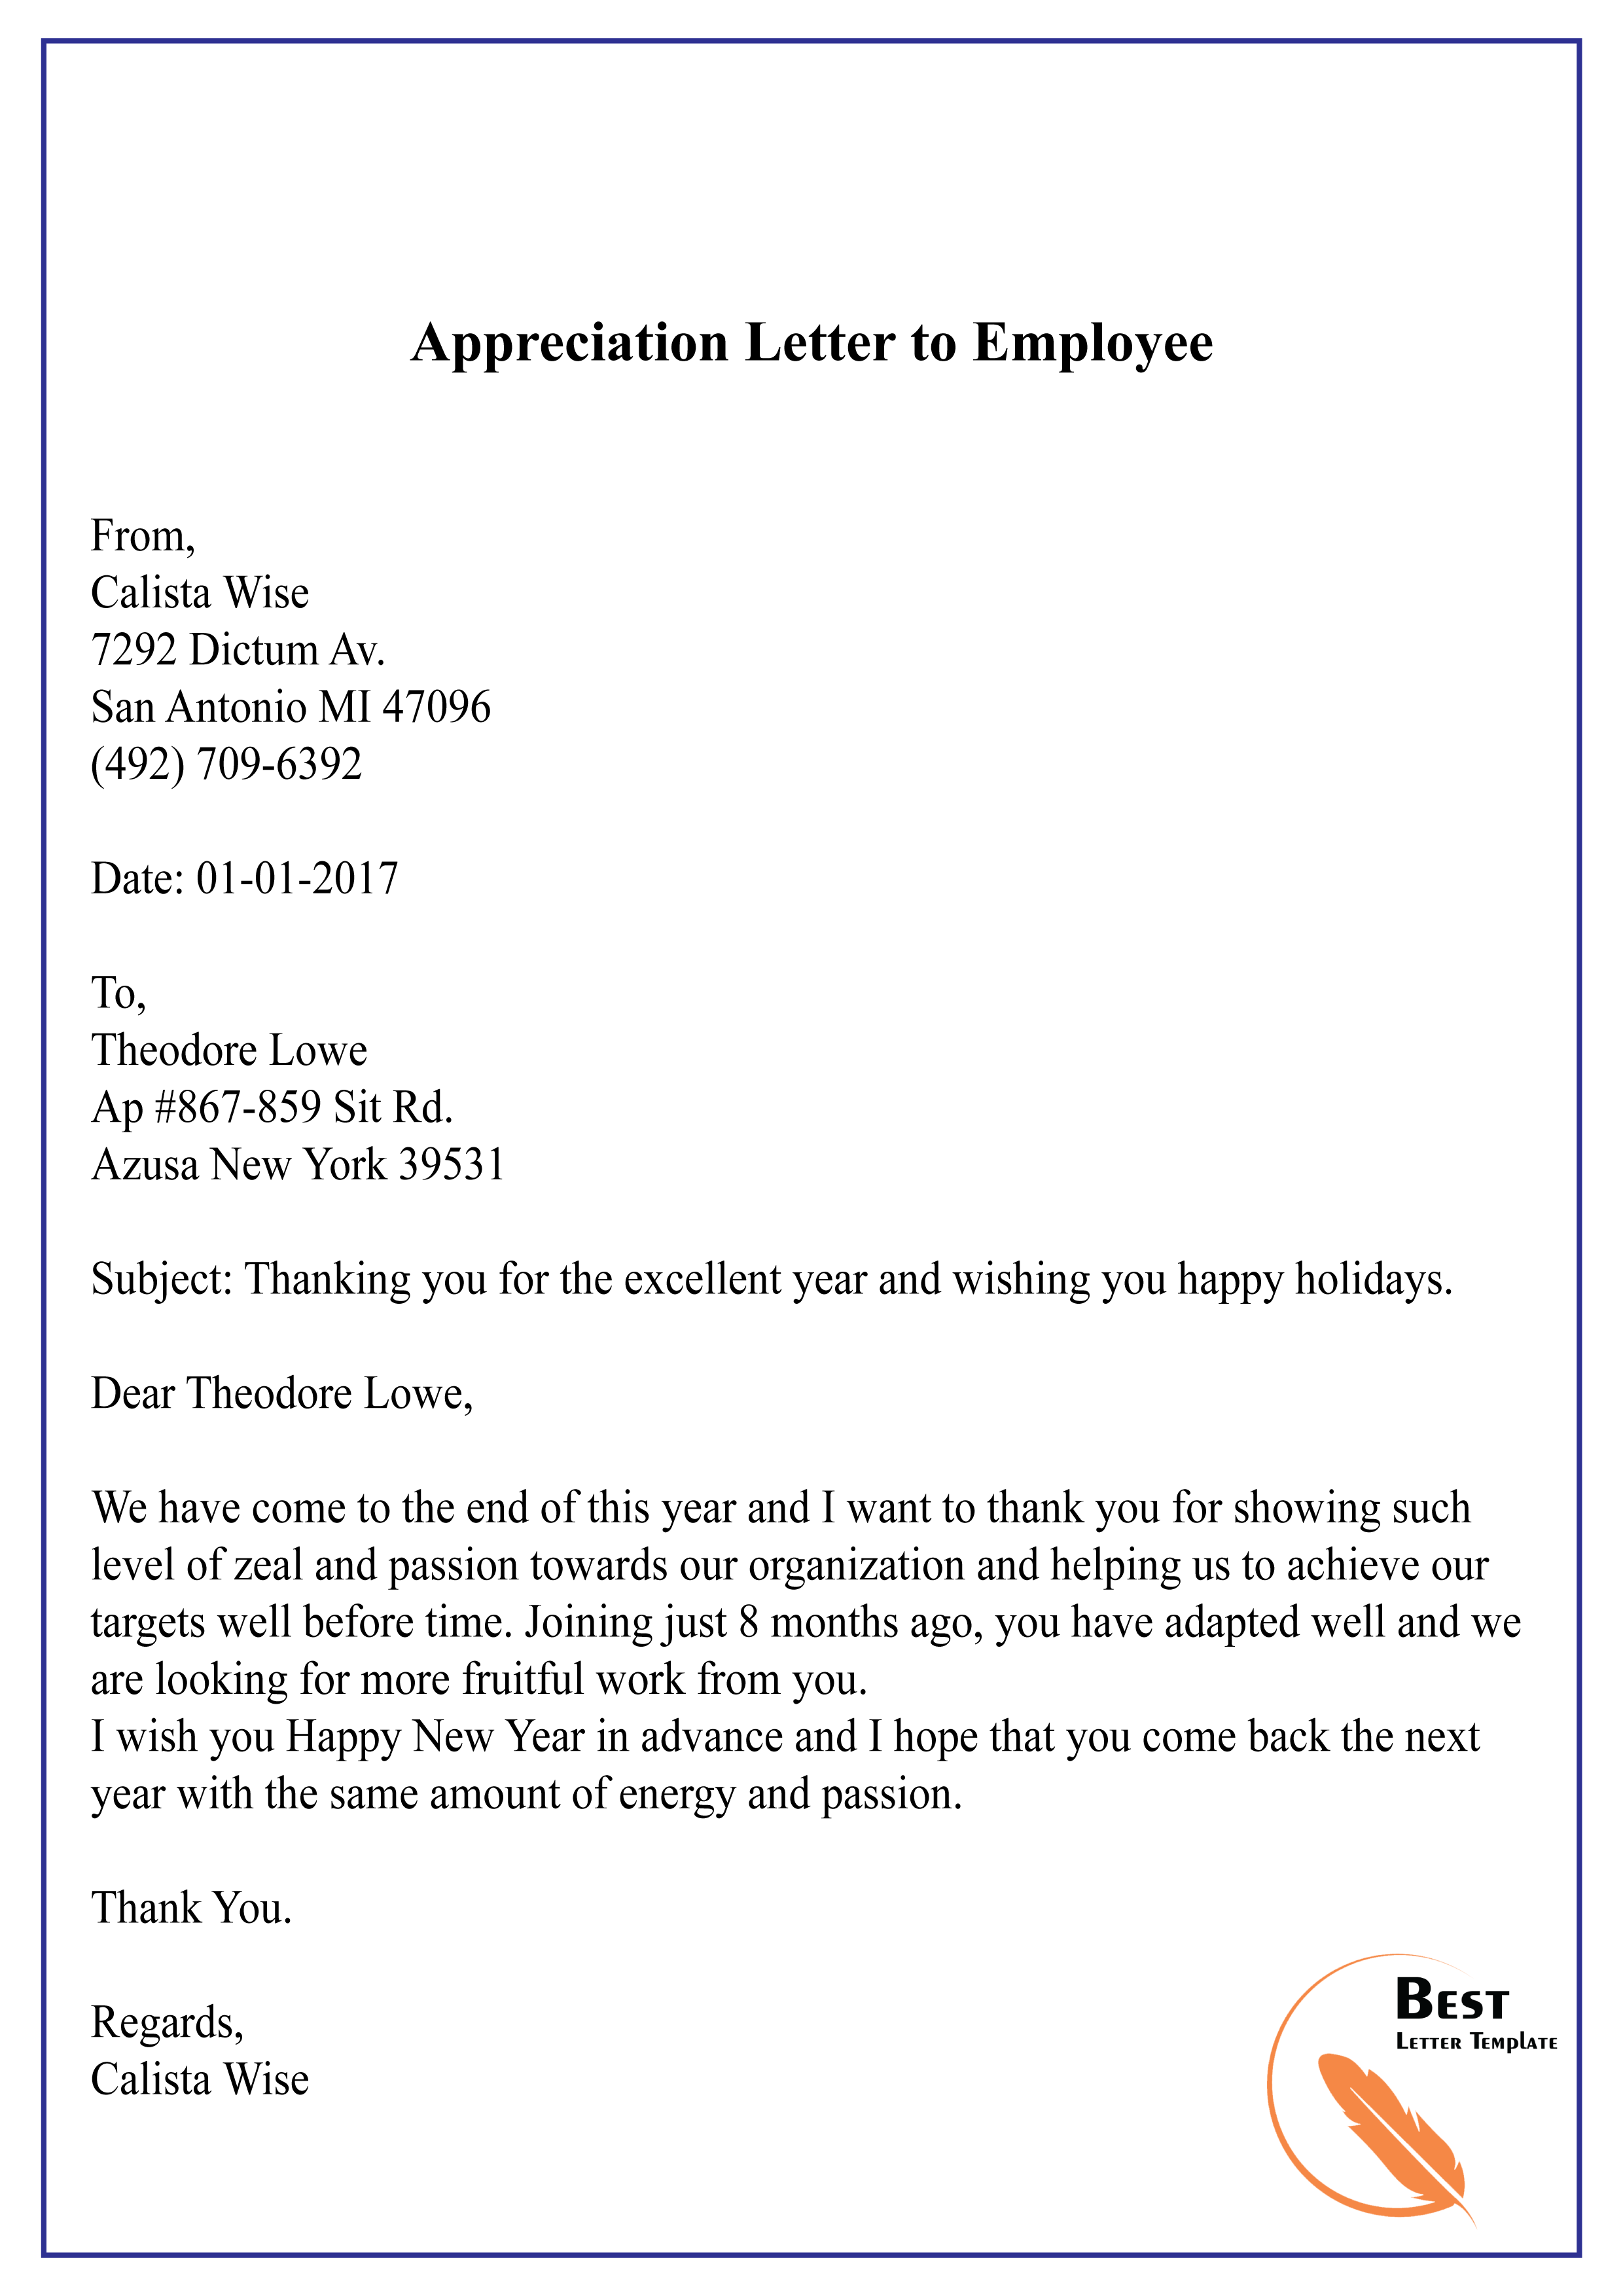 Employee Appreciation Letter Recognition